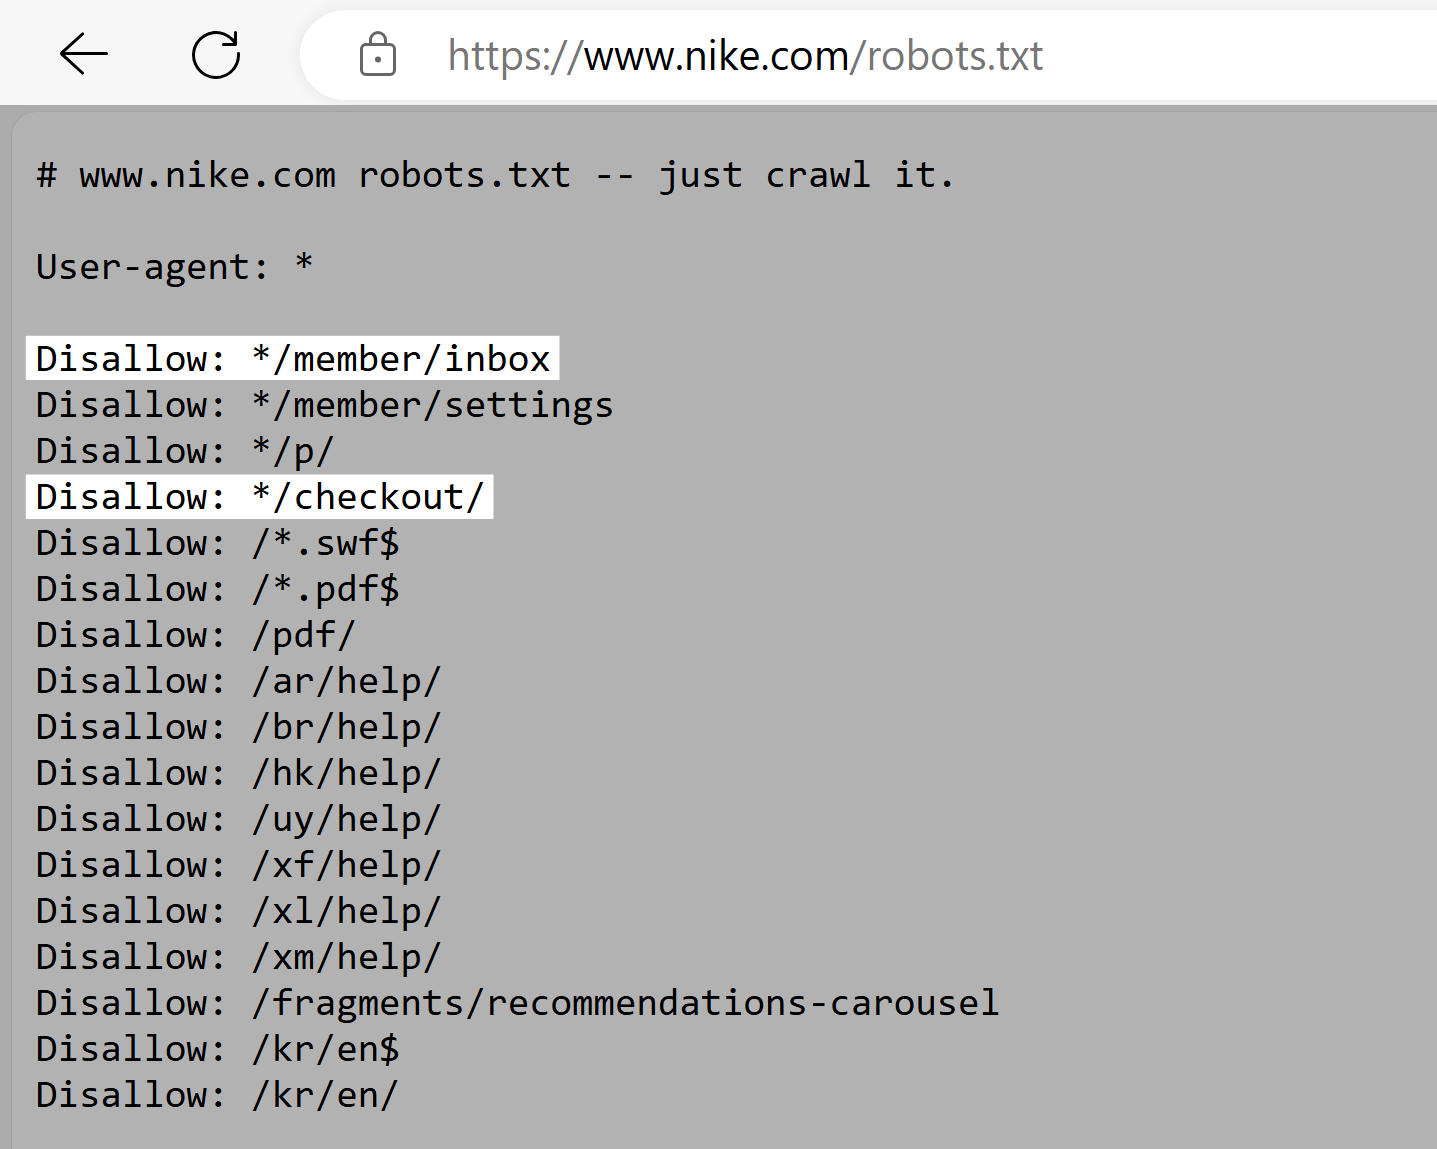 Nike robots.txt file with highlights showing disallowed URL paths.